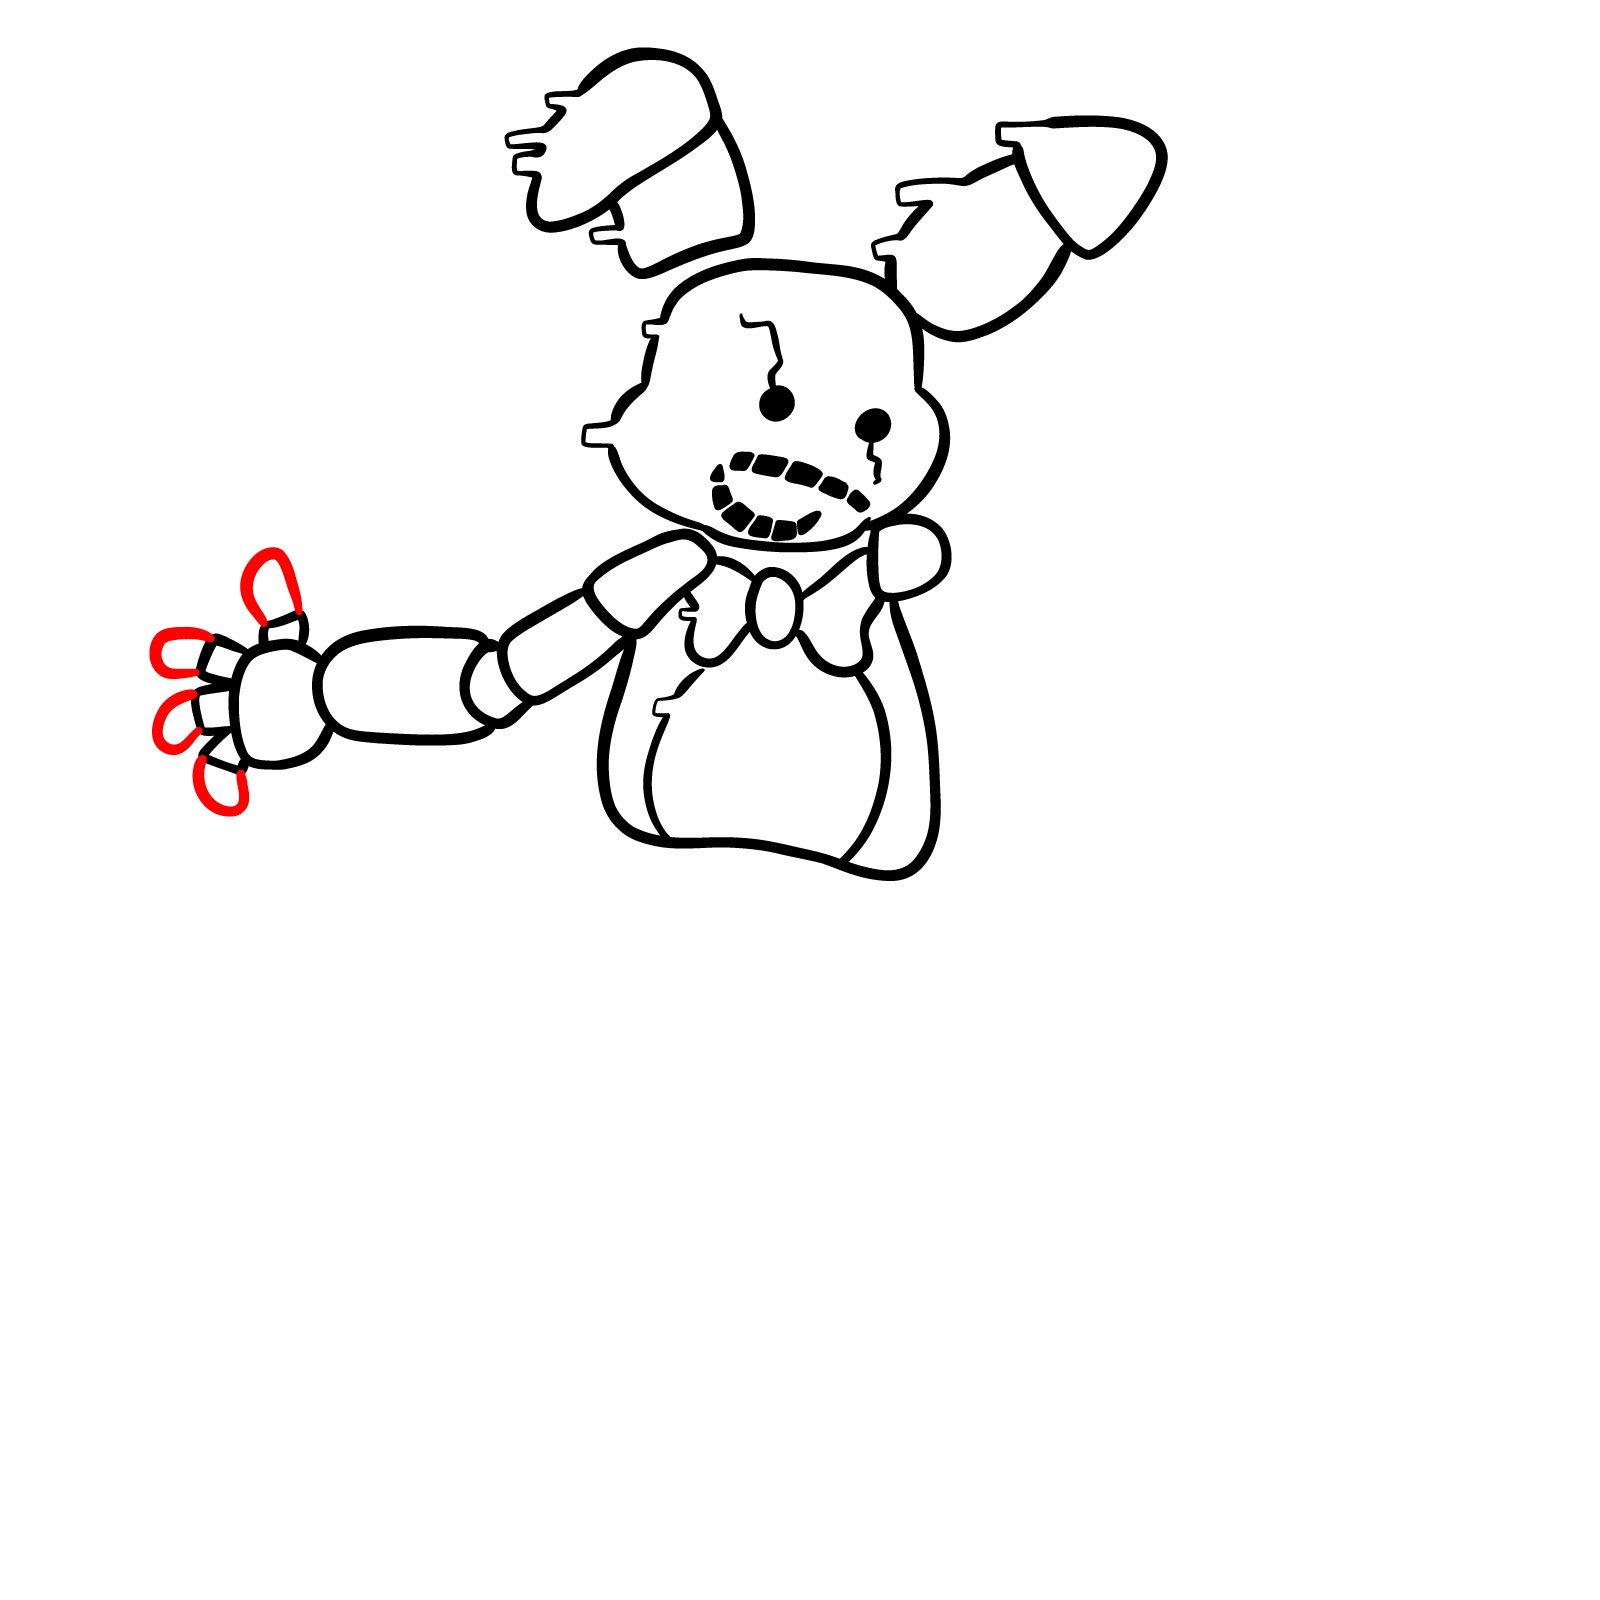 How to draw Shadow Bonnie from FNF: Glitched Legends - step 19